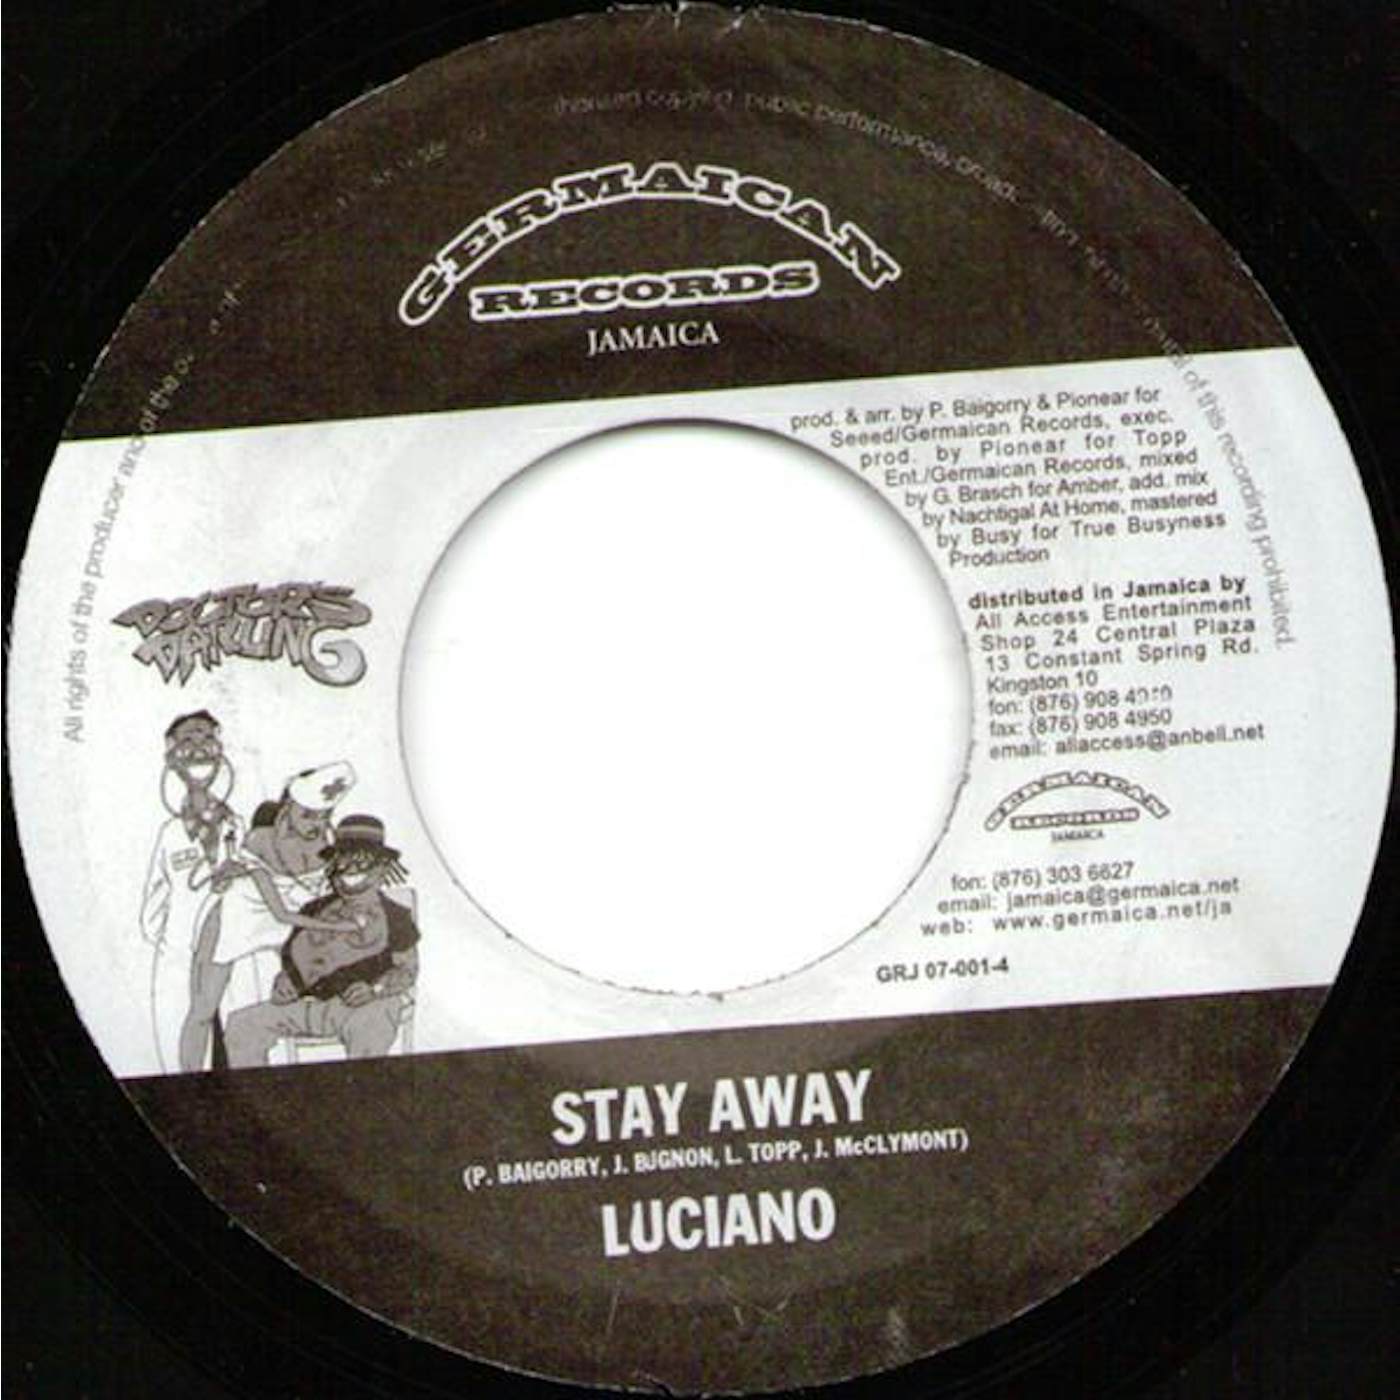 Luciano STAY AWAY Vinyl Record